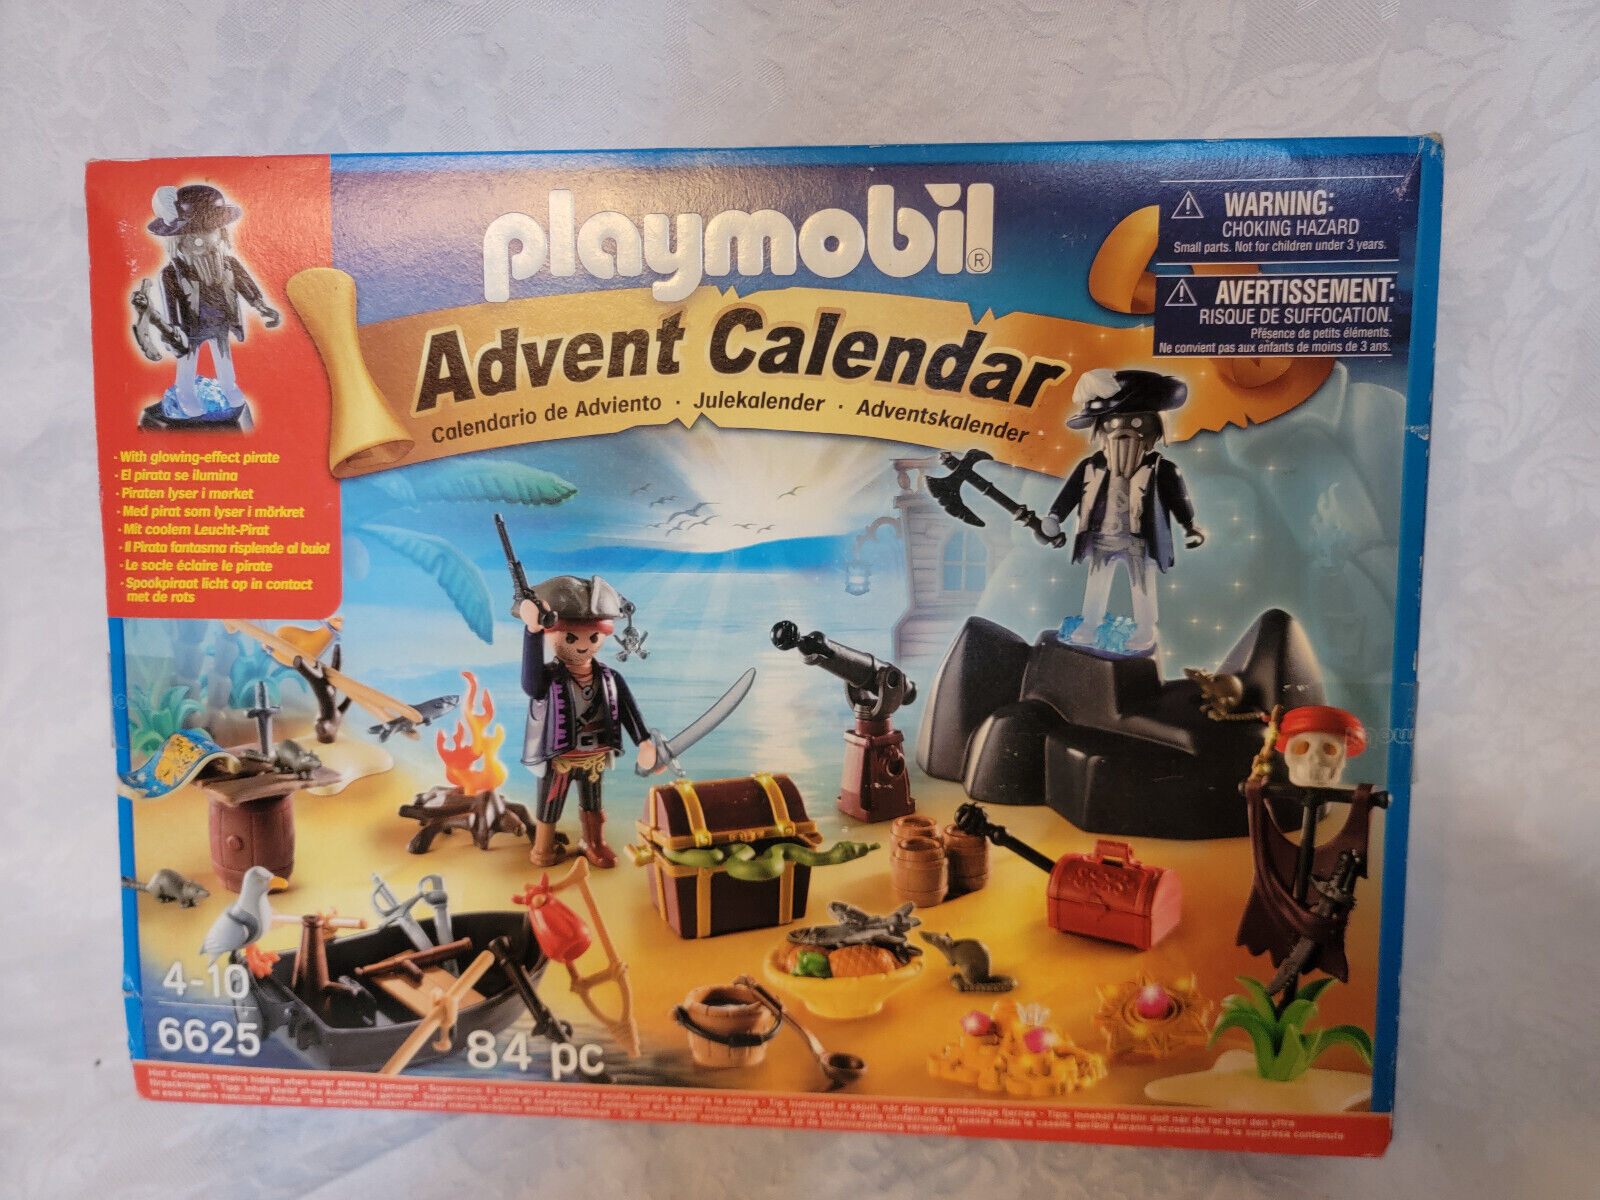 George Eliot betaling konstant Playmobile Advent Calendar Glowing effect #6625 Ages 4-10 84 Pieces | eBay